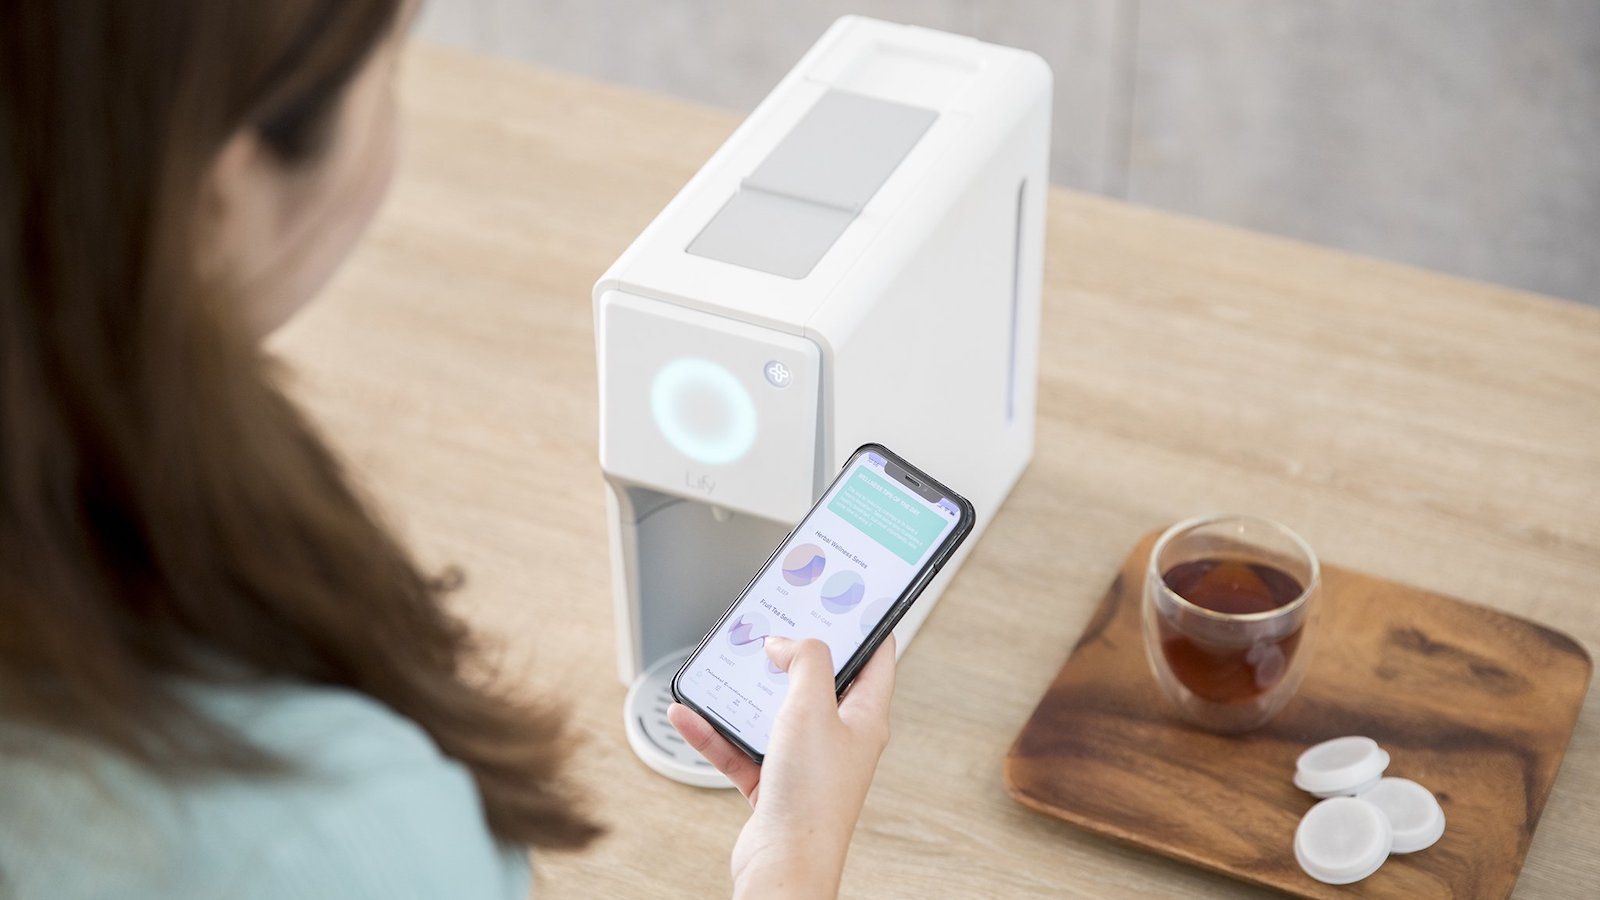 Lify Smart Herbal Brewer tea maker uses patented bloom and brew herbal infusion technology